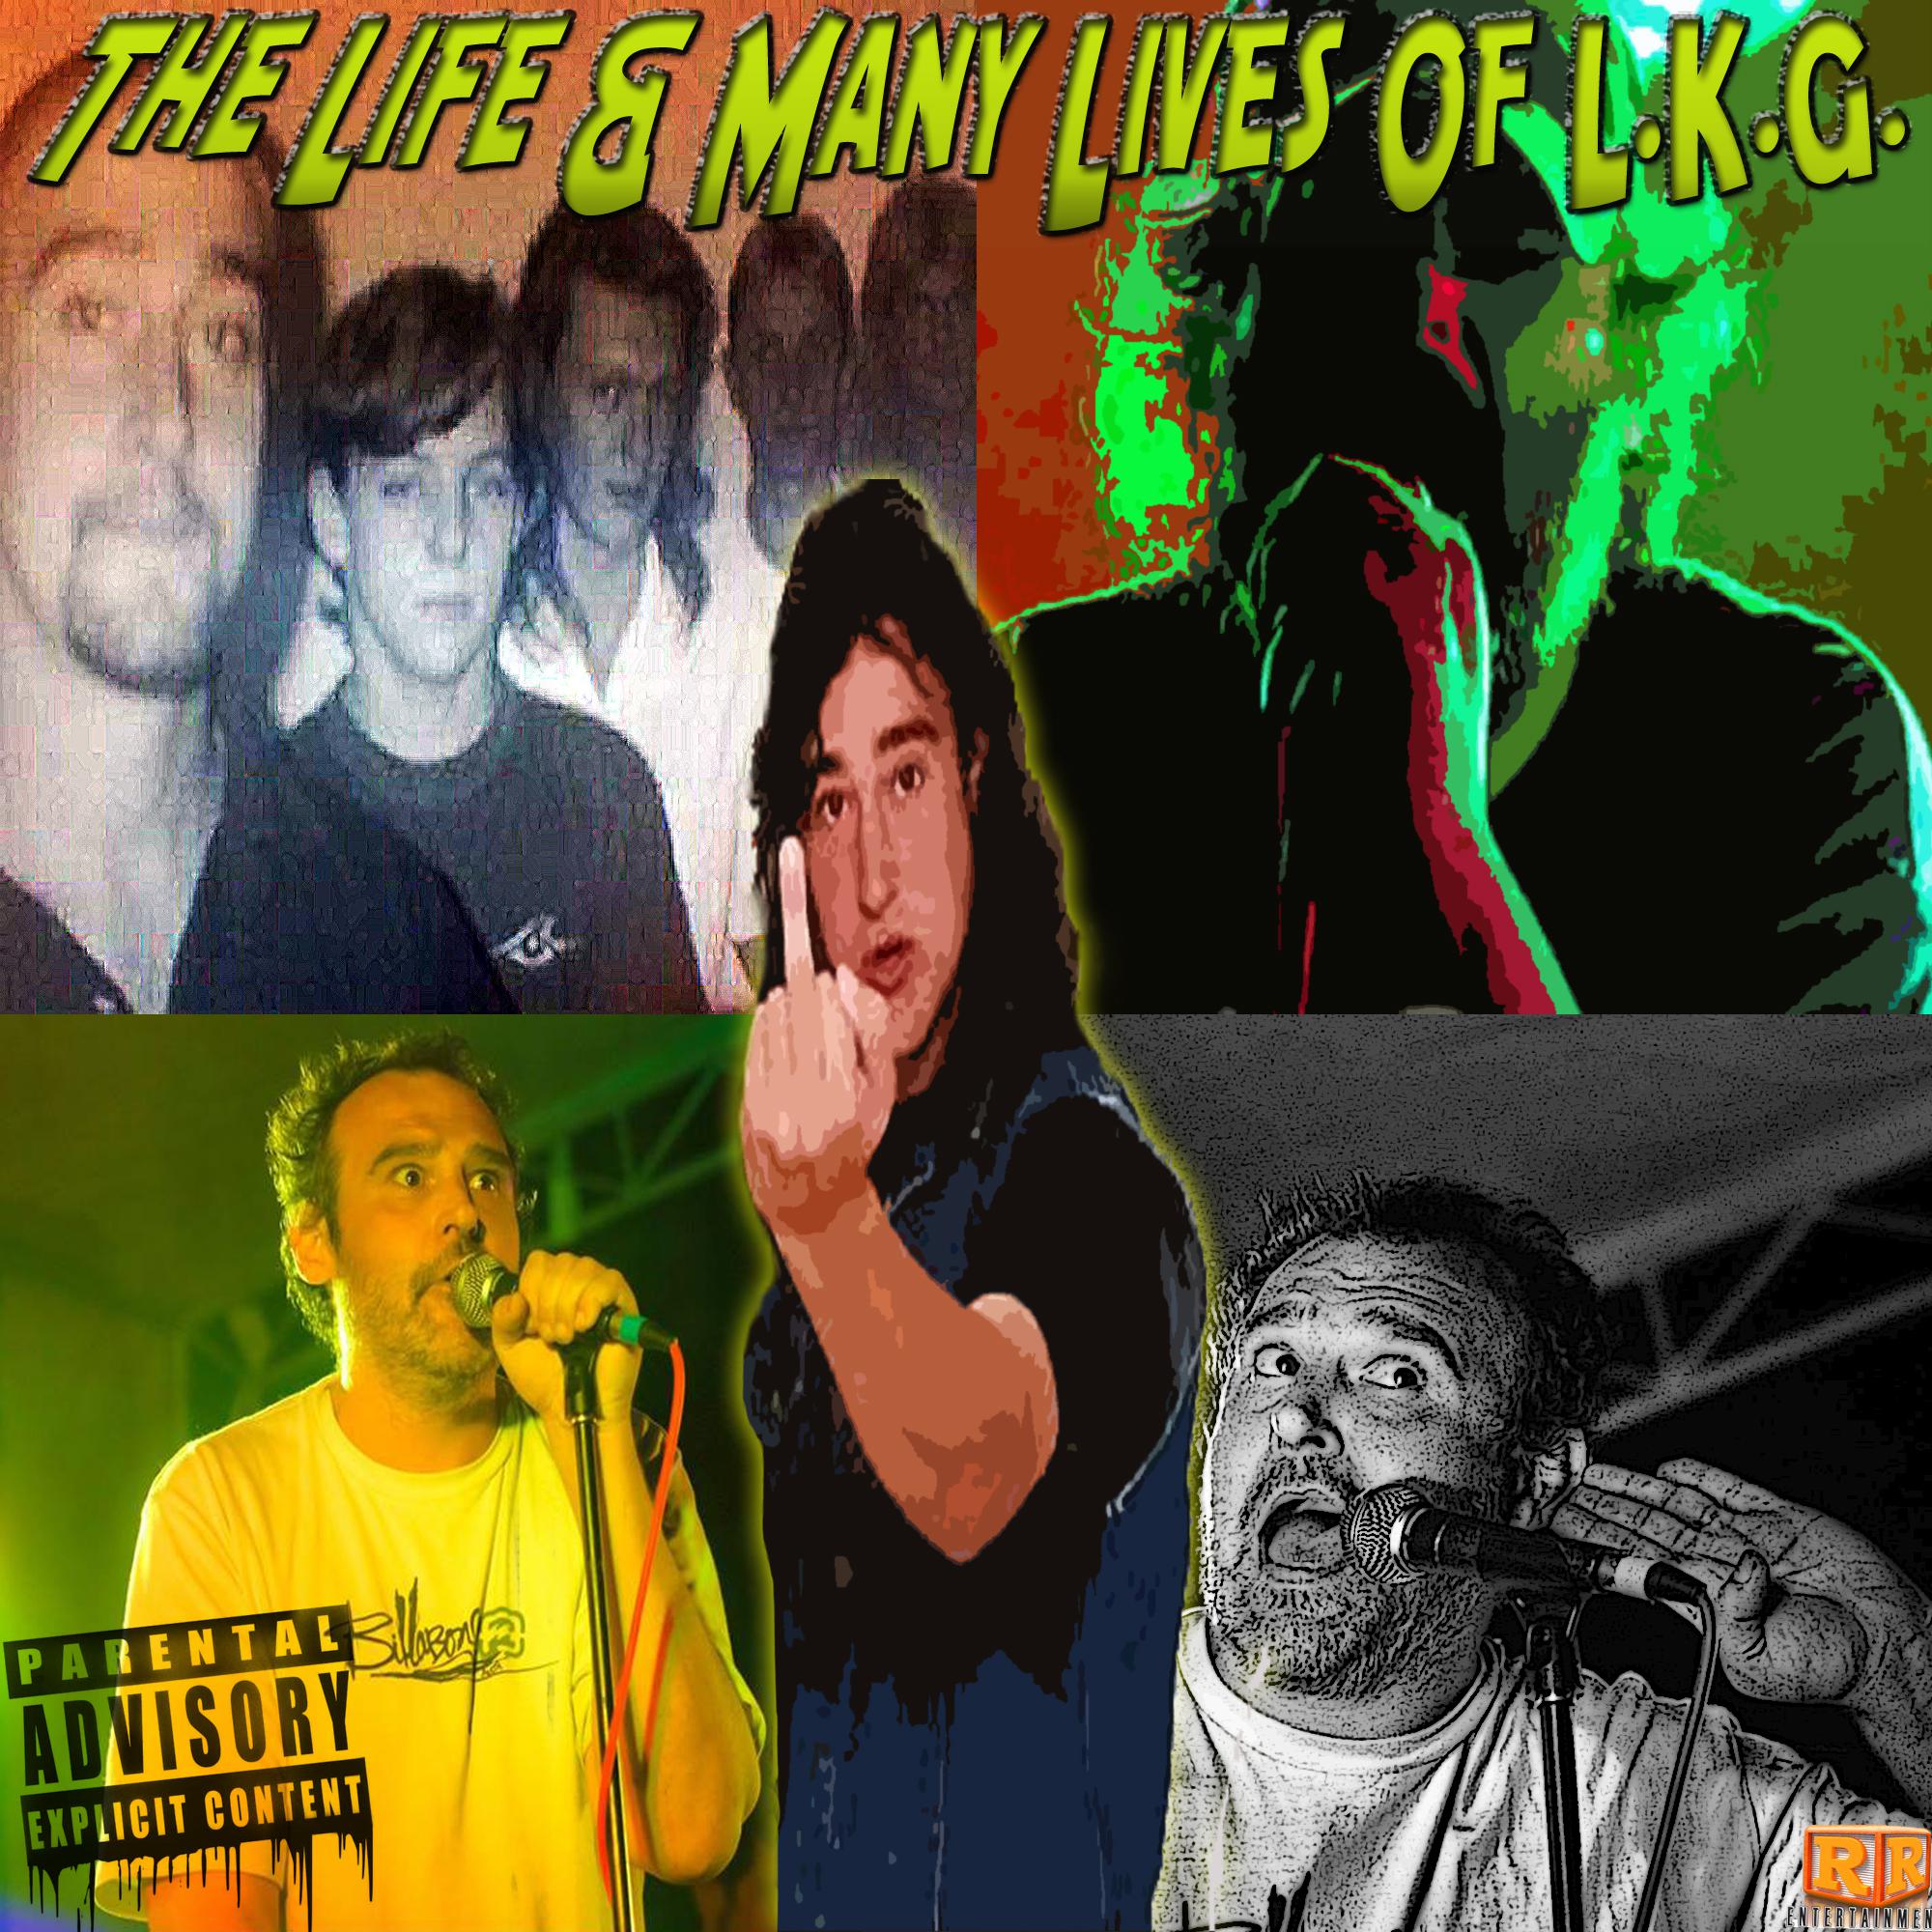 The Life & Many Lives of L.K.G.